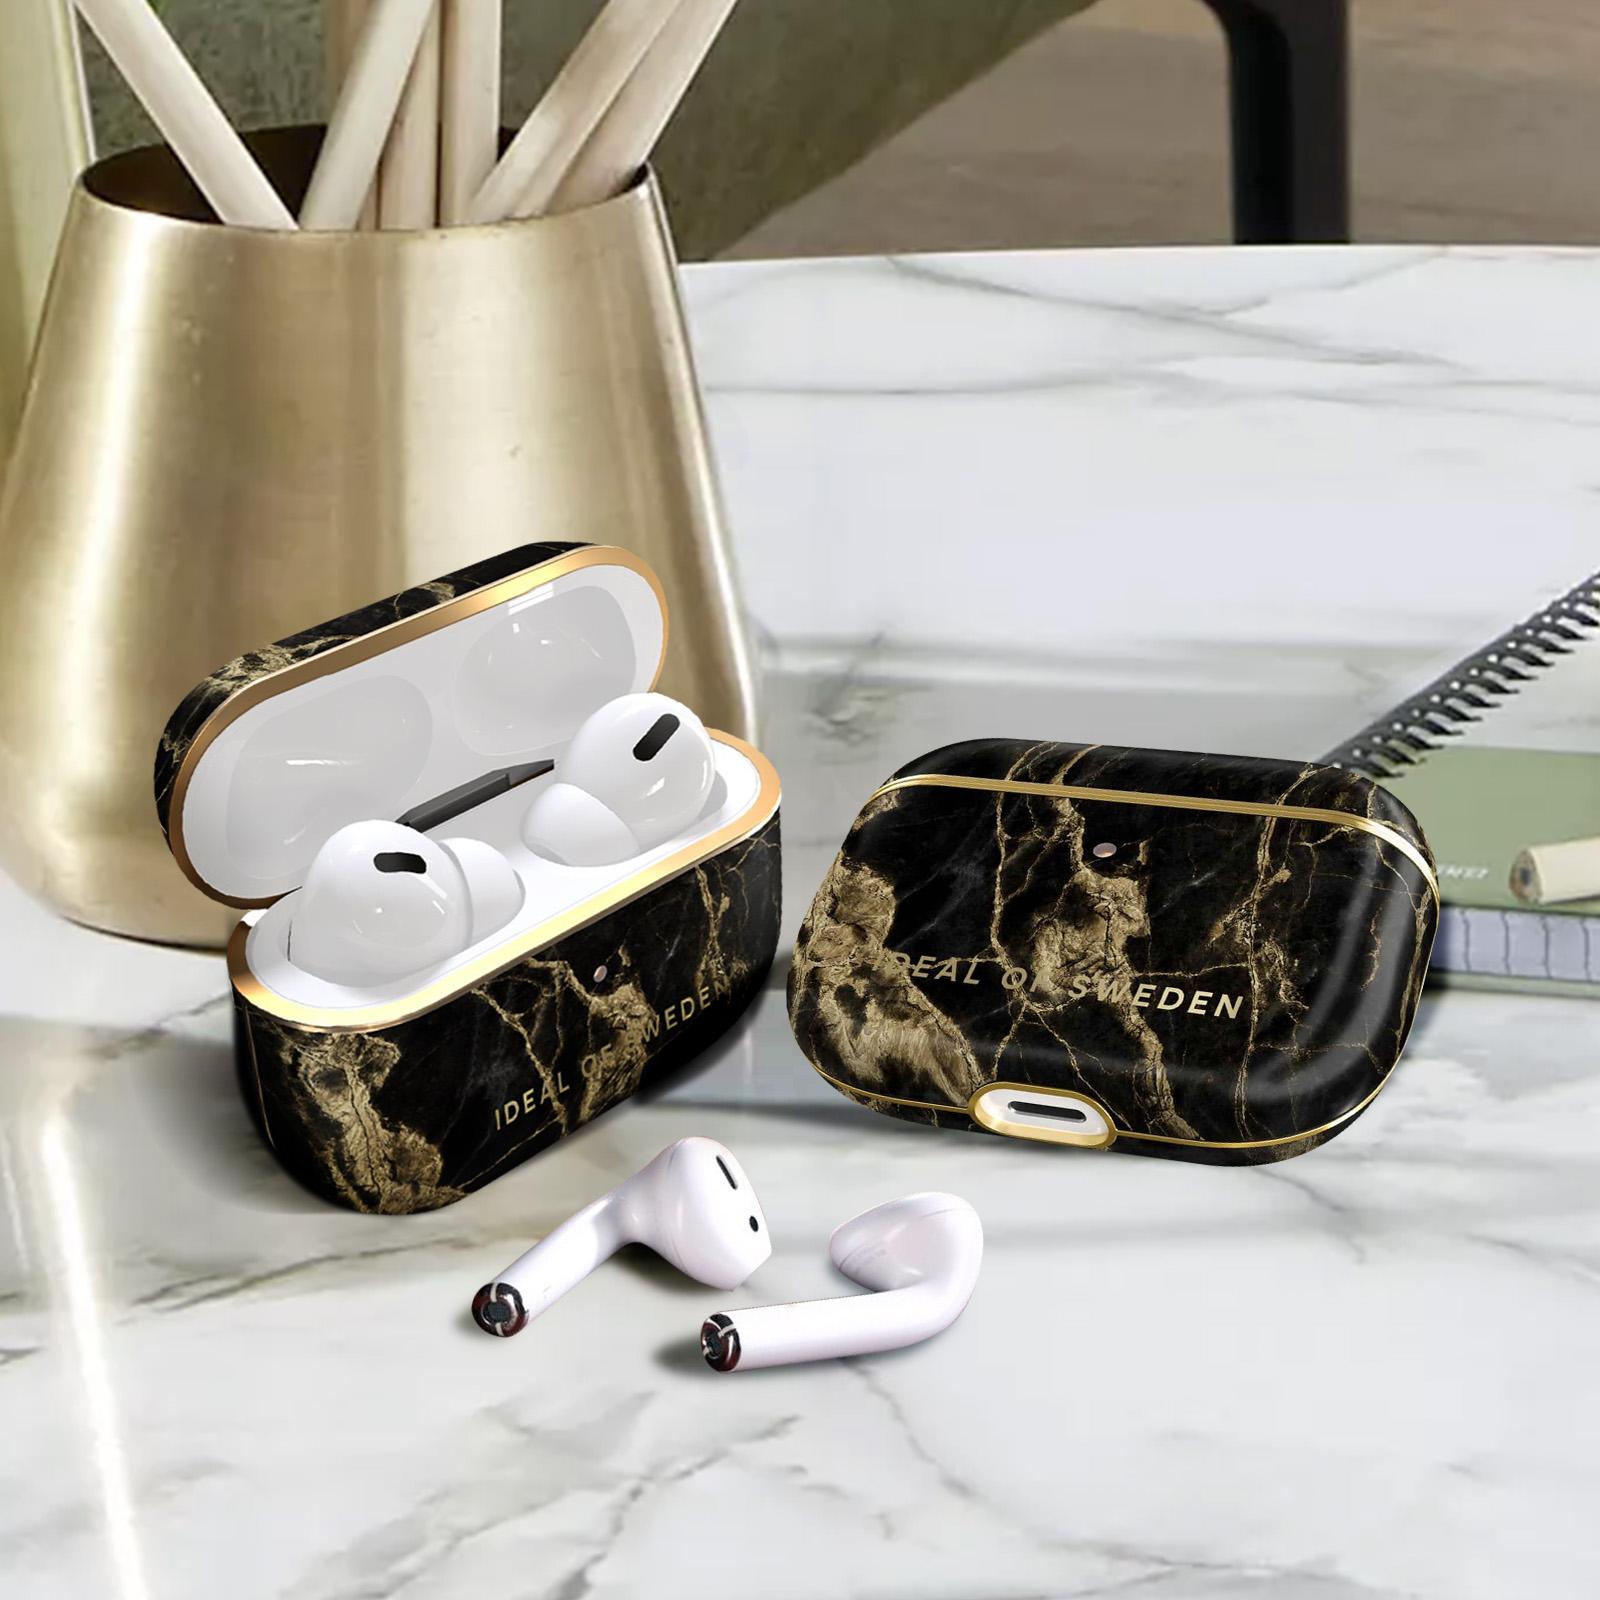 Case für: OF SWEDEN Marble Golden IDFAPC-PRO-191 IDEAL Smoke Full Apple passend Cover AirPod